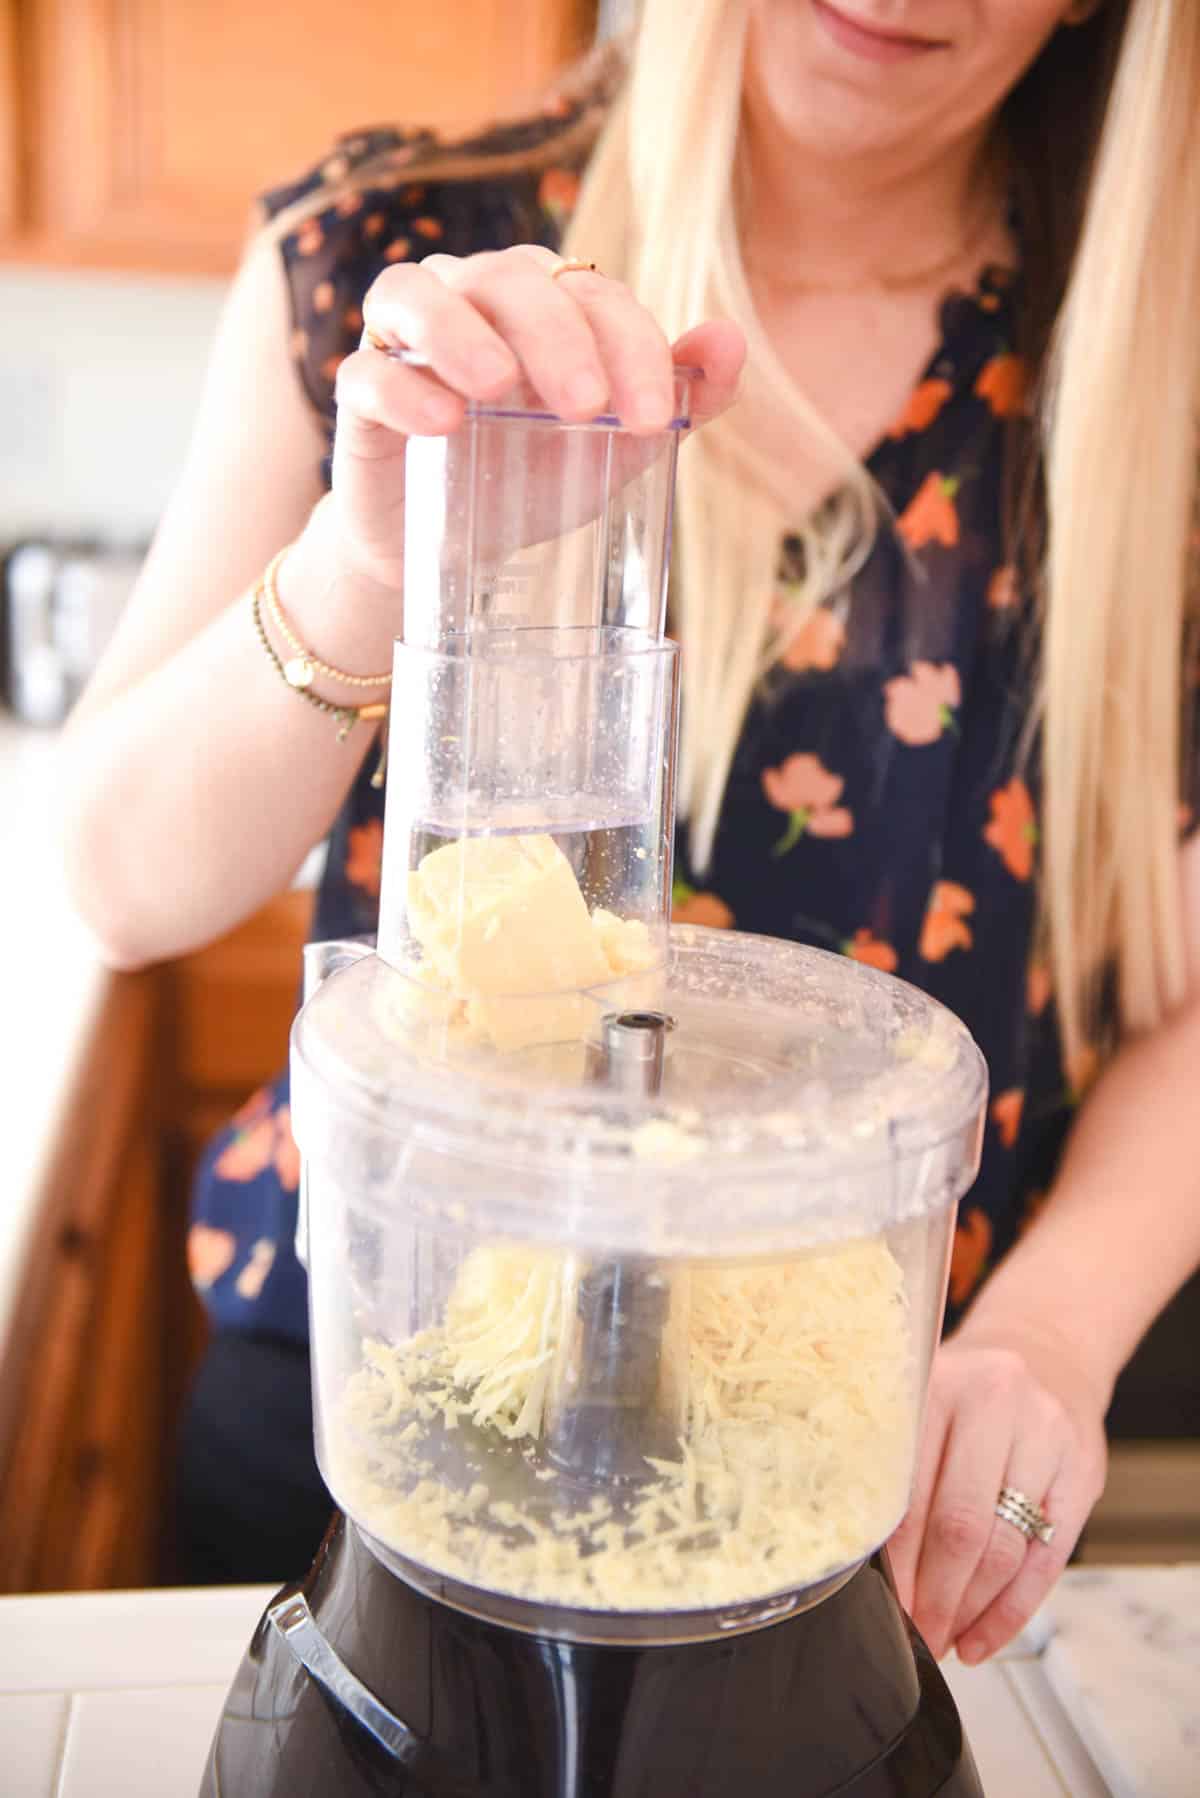 Woman using a food processor to grate cheese.